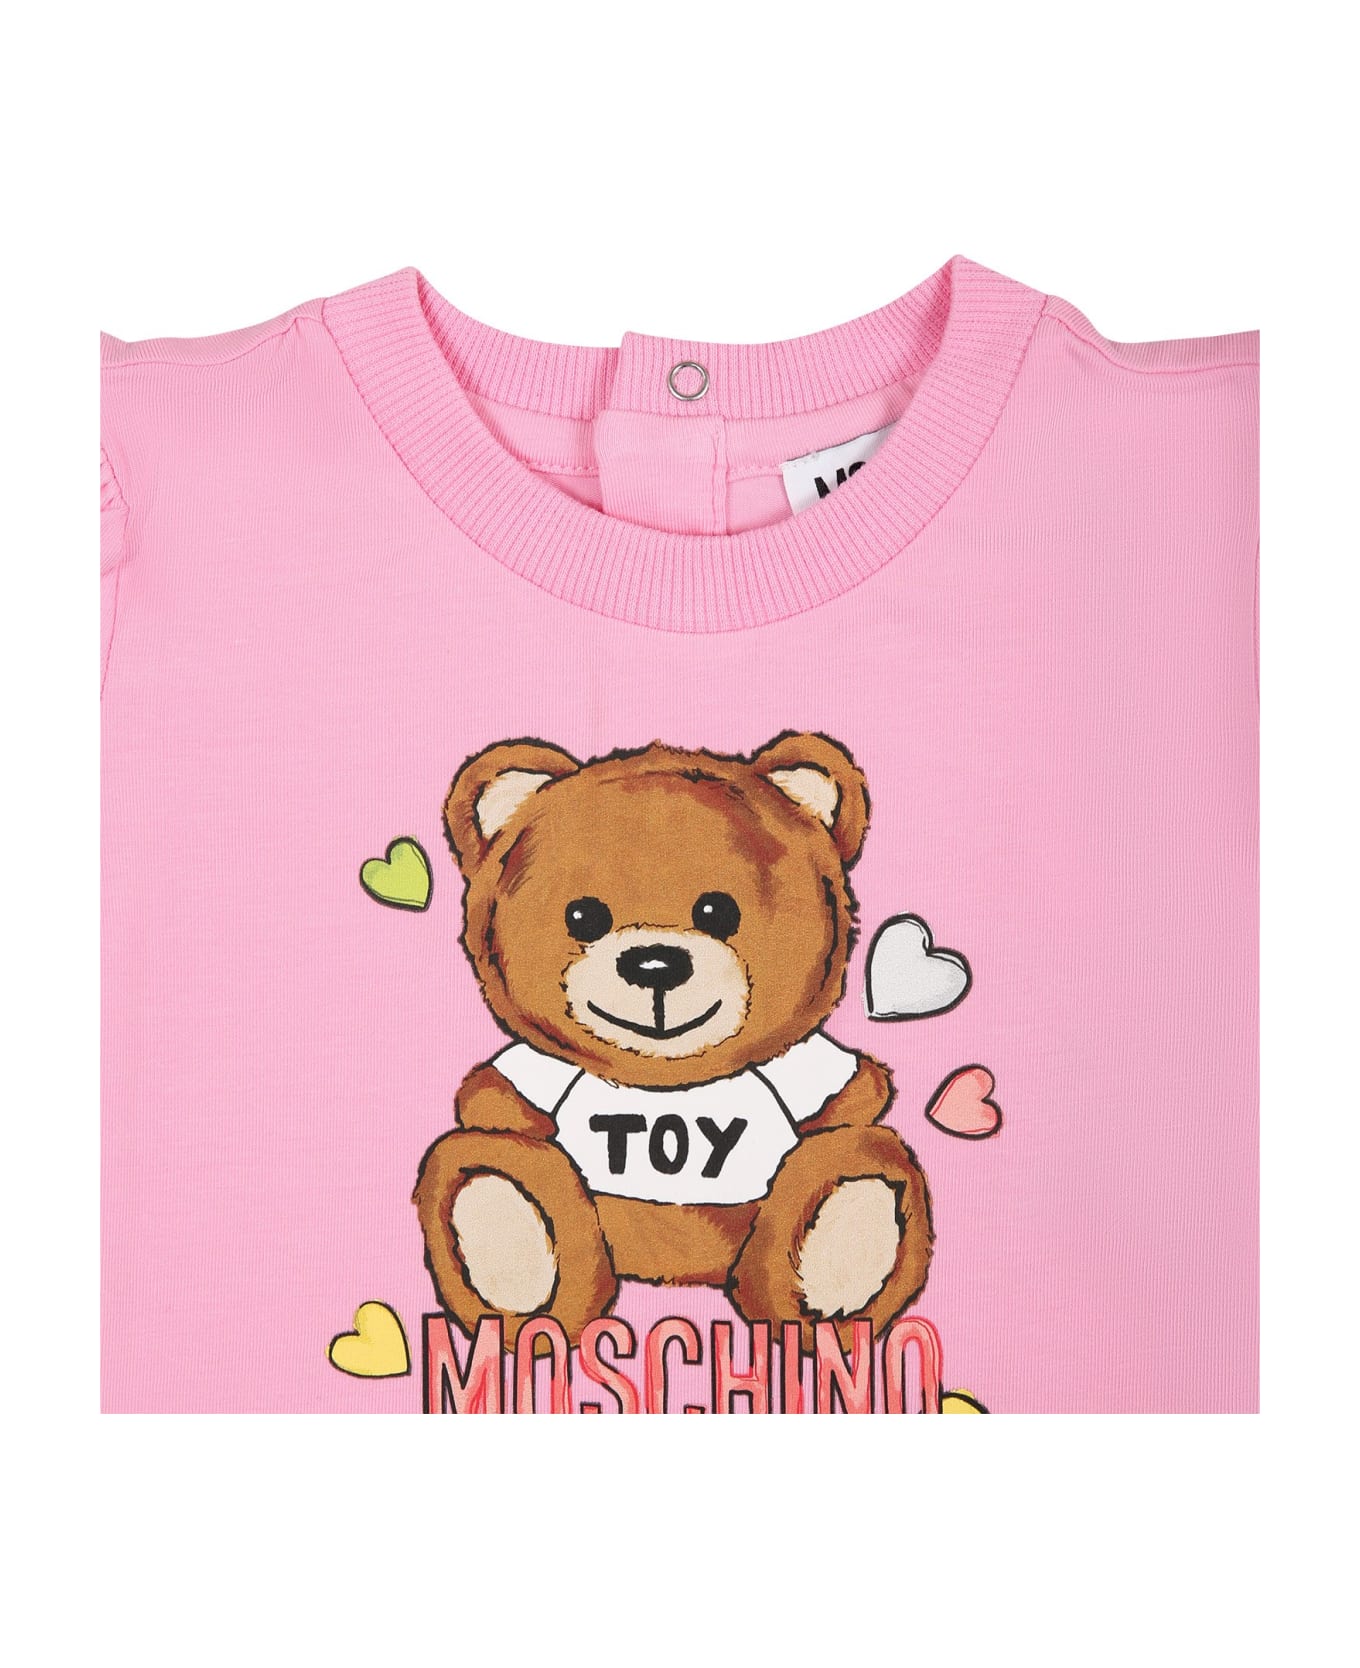 Moschino Pink Dress For Baby Girl With Teddy Bear Print - Pink